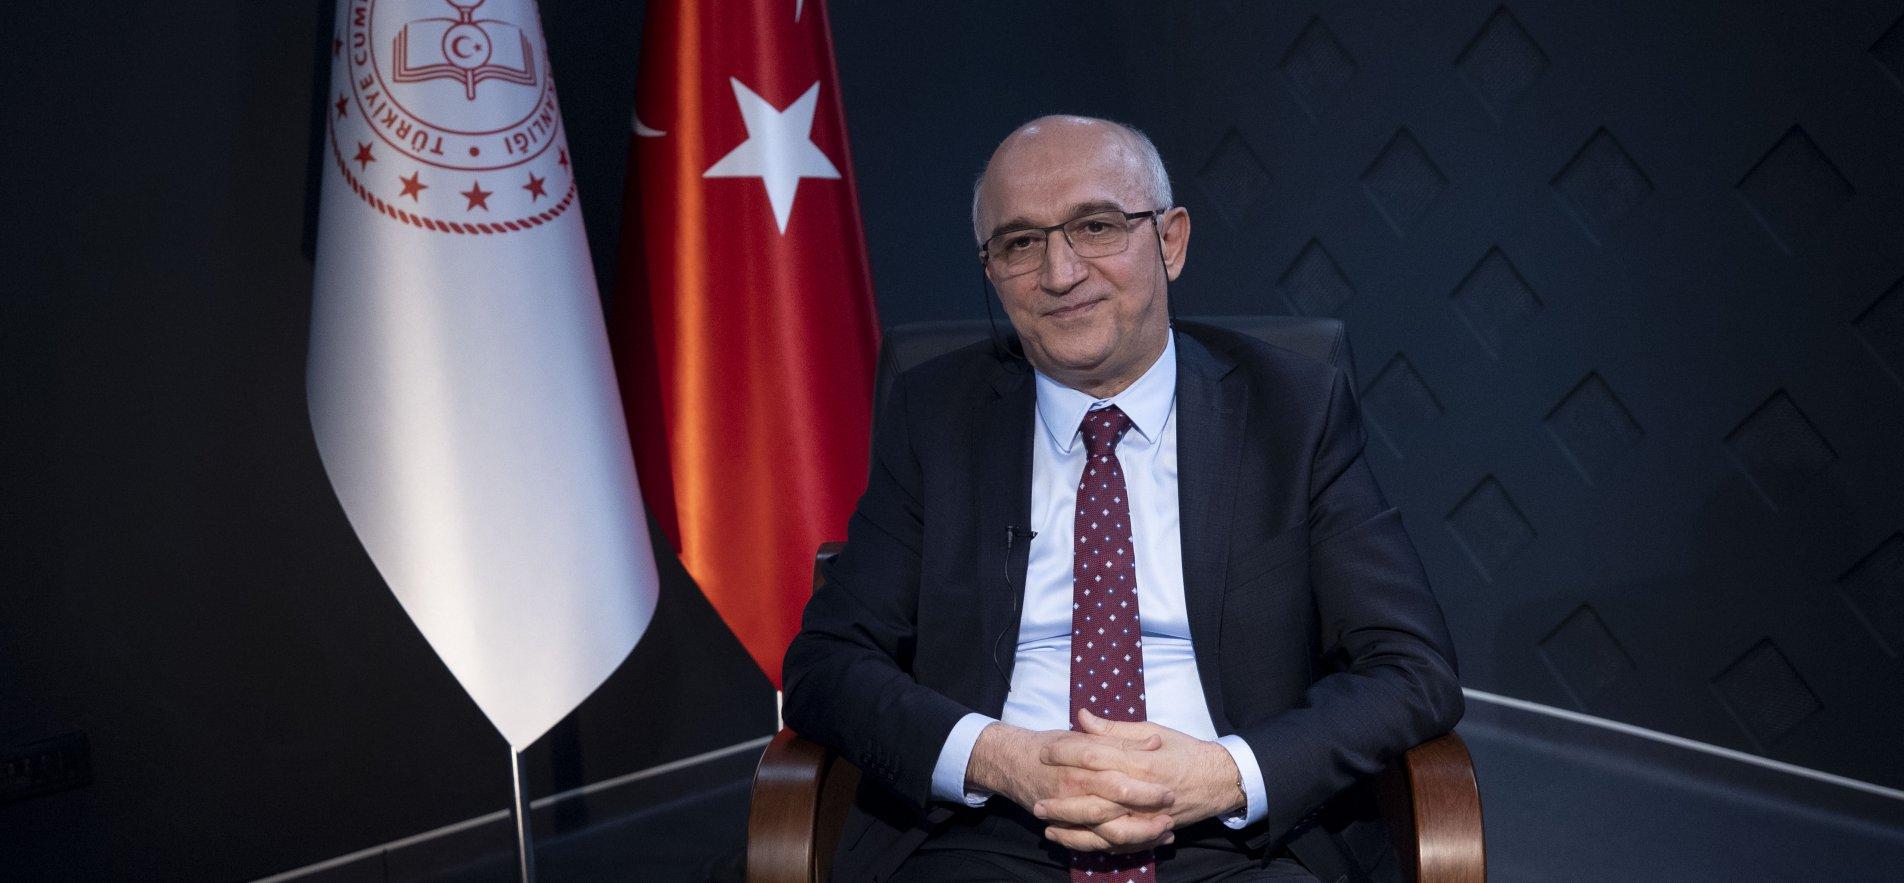 DEPUTY MINISTER ŞENSOY ANSWERED QUESTIONS ABOUT LGS AND OTHER CENTRAL EXAMS